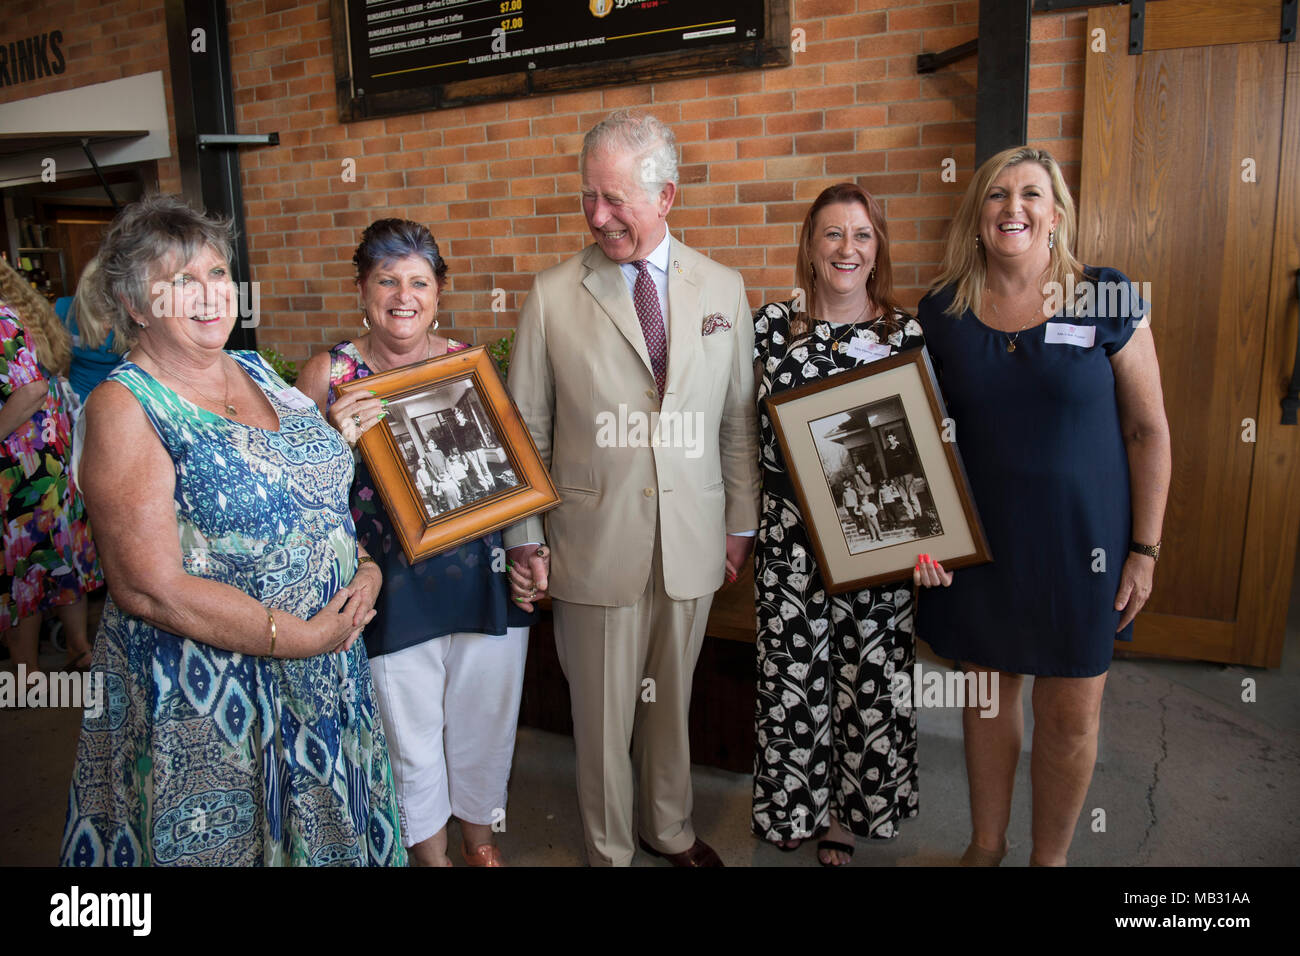 The Prince of Wales meets four sisters he boarded with when he was 17, in Geelong, Victoria where he went to school, (Left to right) Penny Jenner, Jane Tozer, Amanda Boxhall and Lisa Lawlor during a tour of the Bundaberg Rum Distillery. Stock Photo